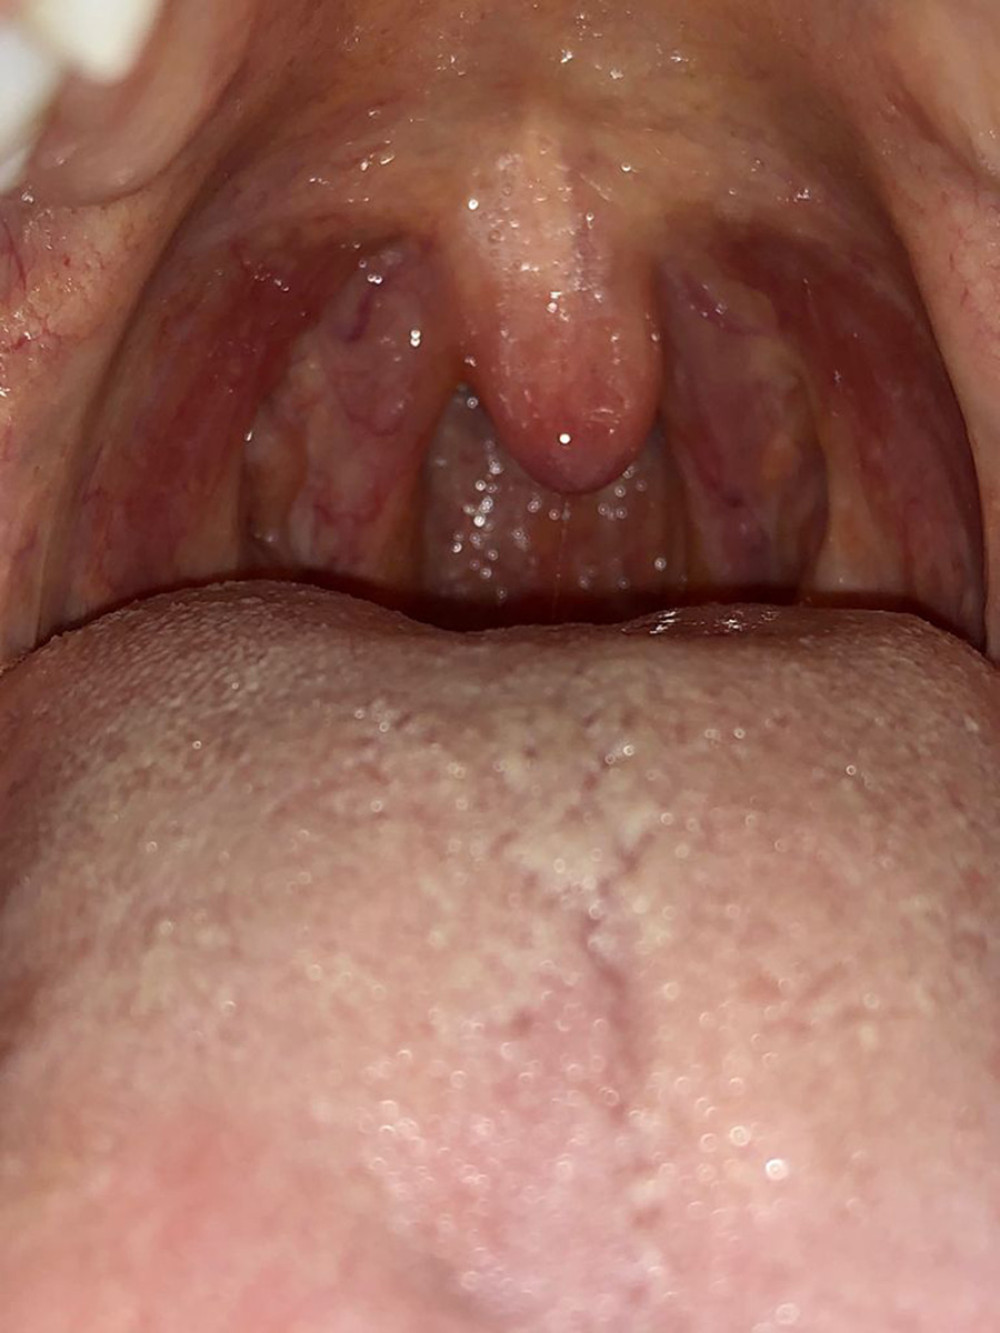 A shortened uvula was observed on day 14 after EGD.